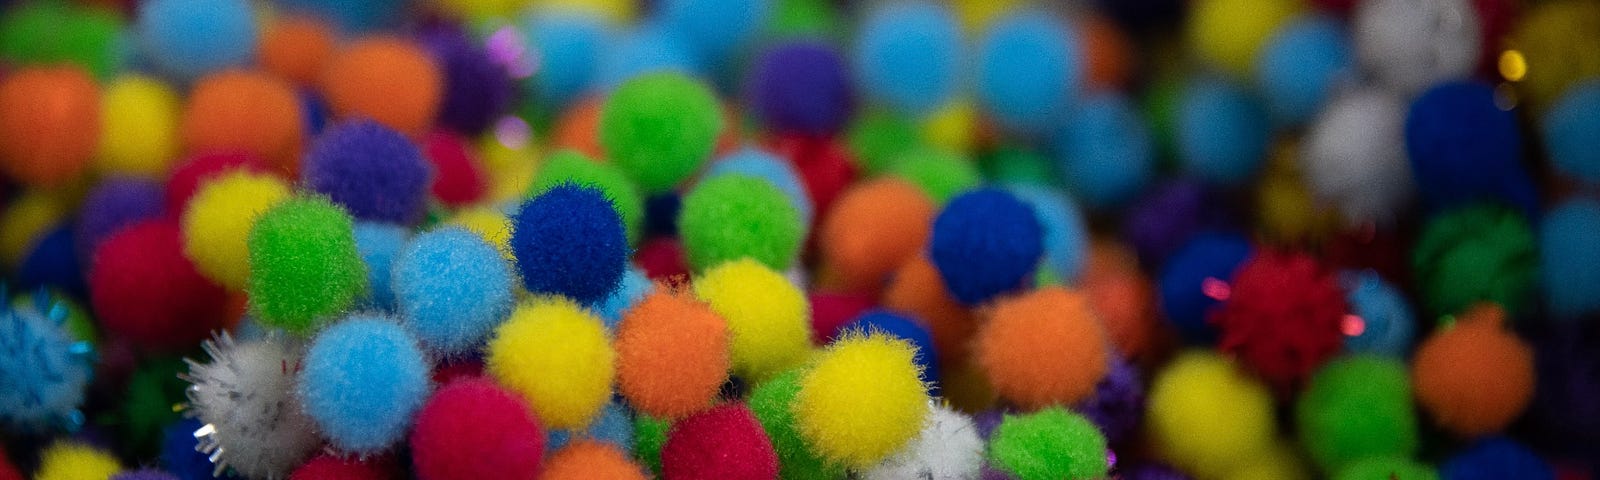 Color photo of a bunch of colorful pom poms.